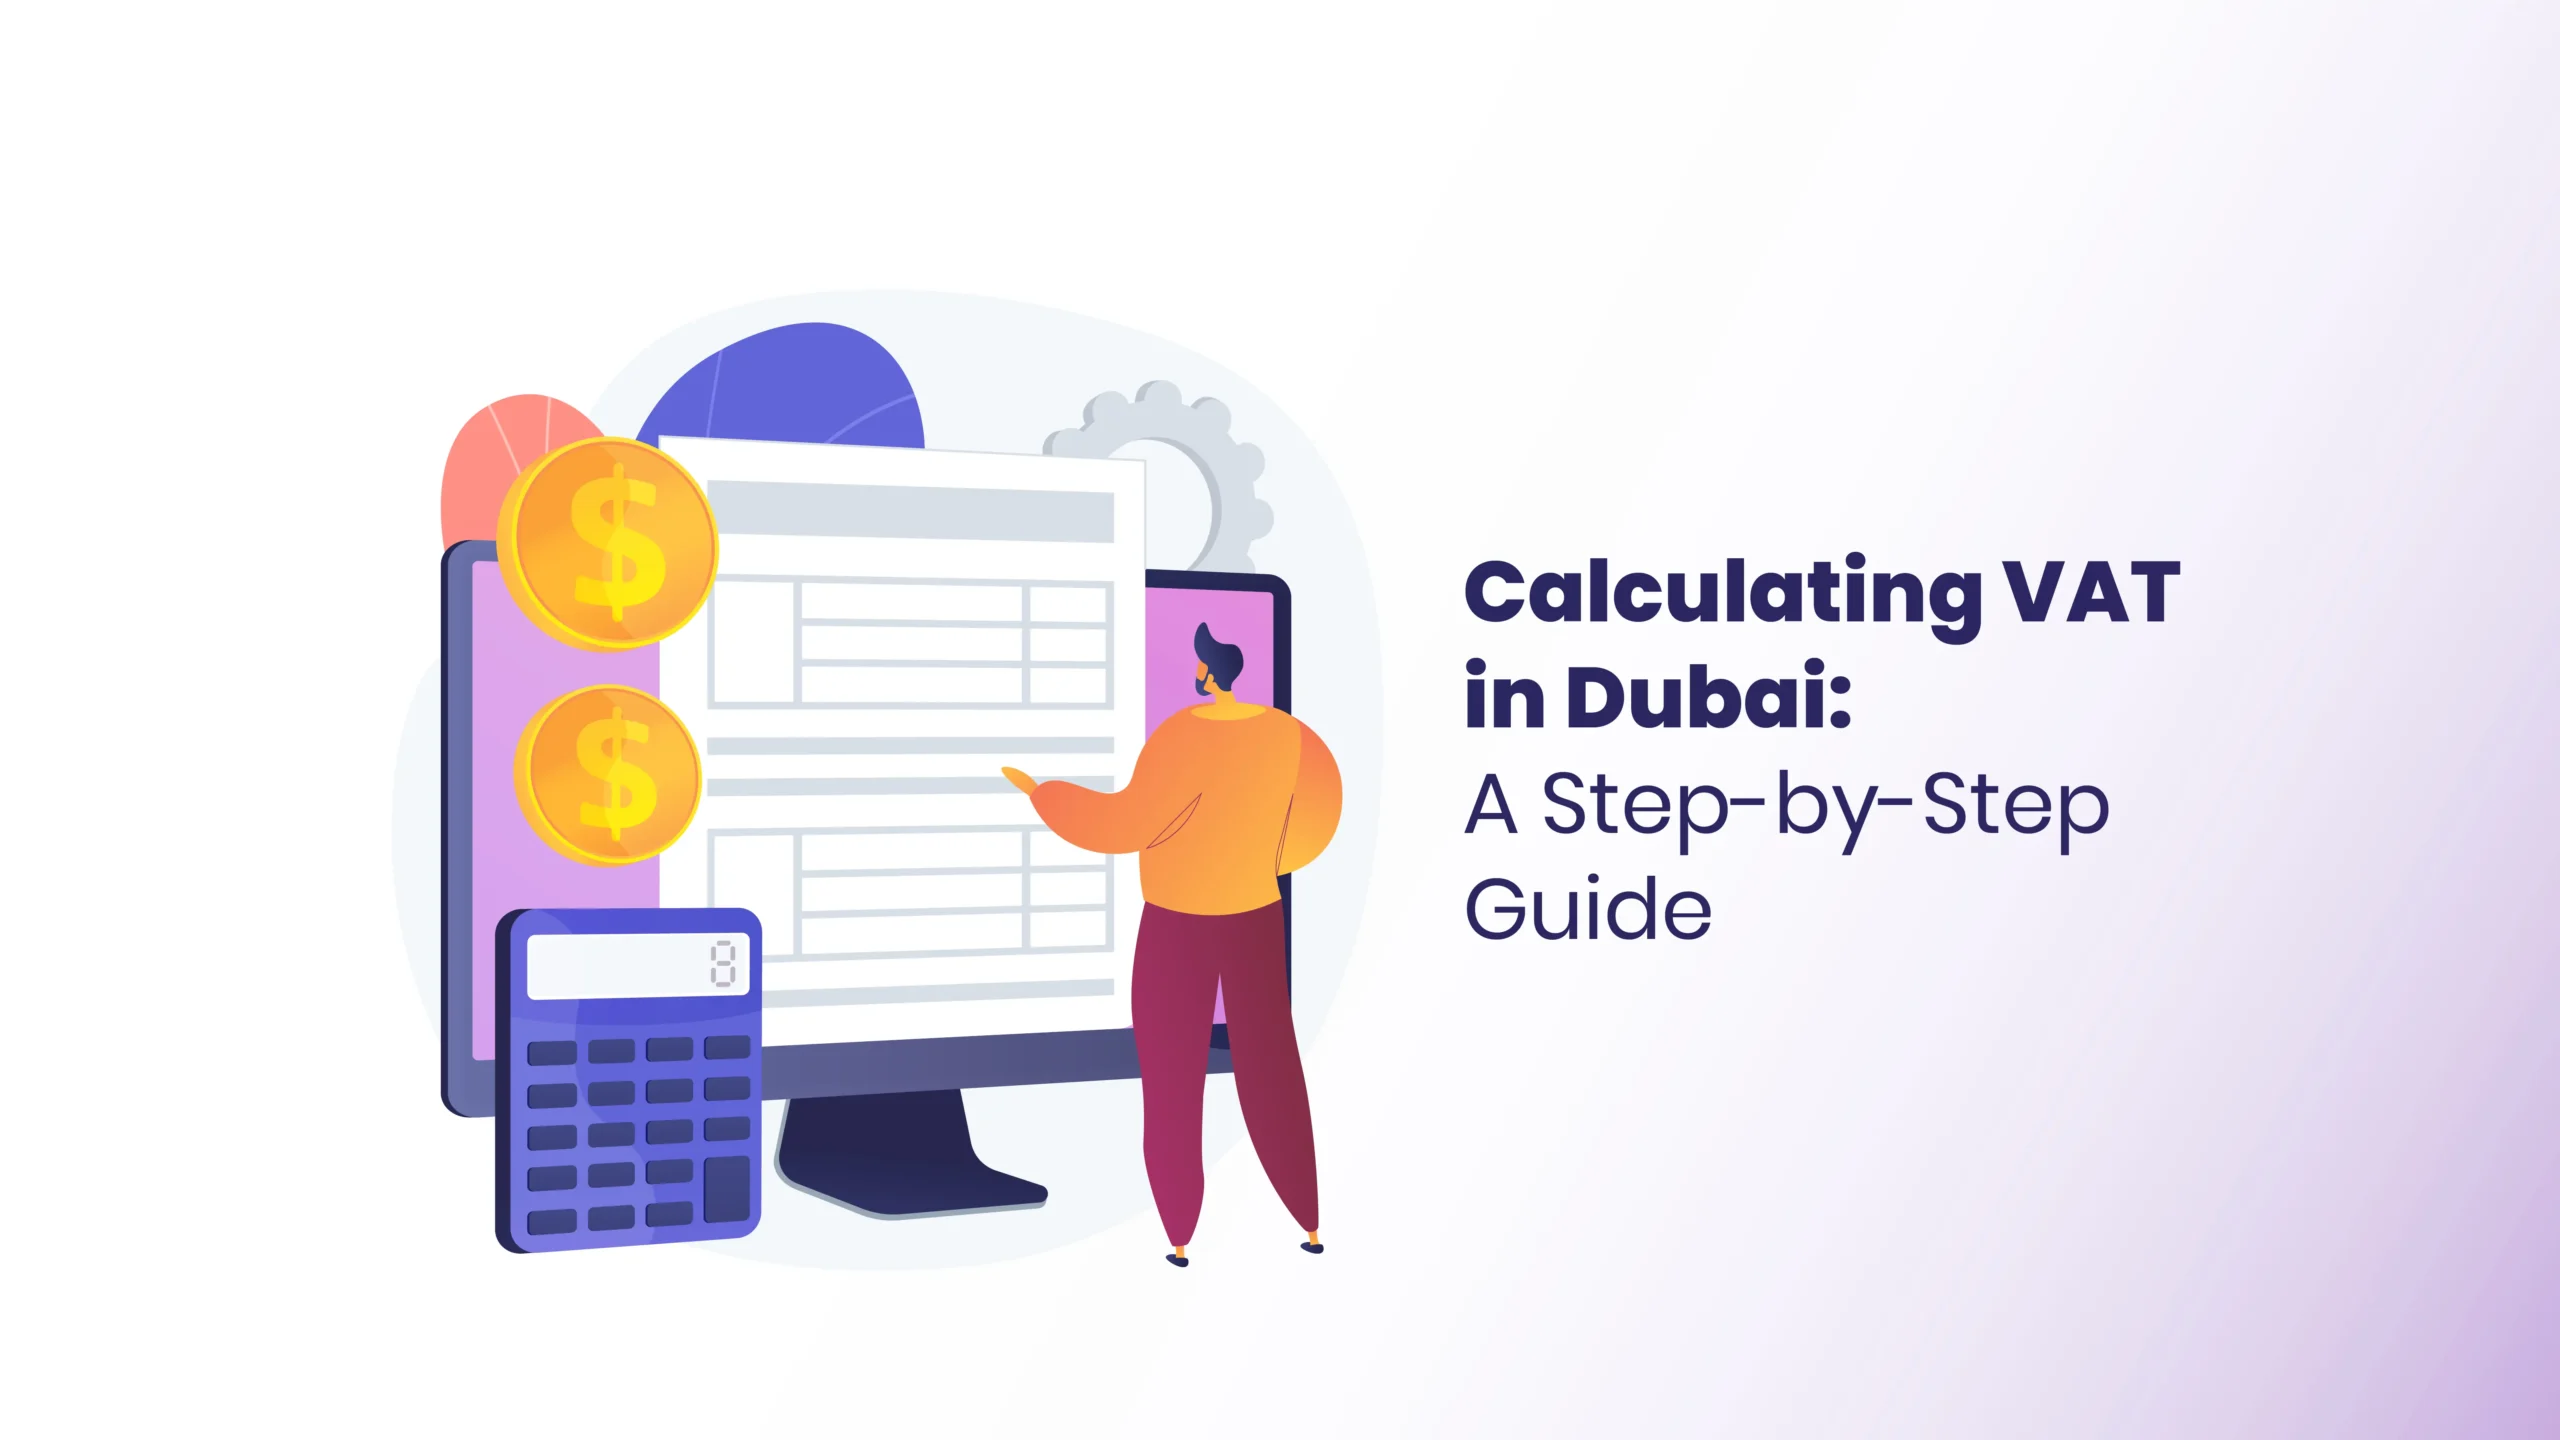 Calculating VAT in Dubai: A Step-by-Step Guide